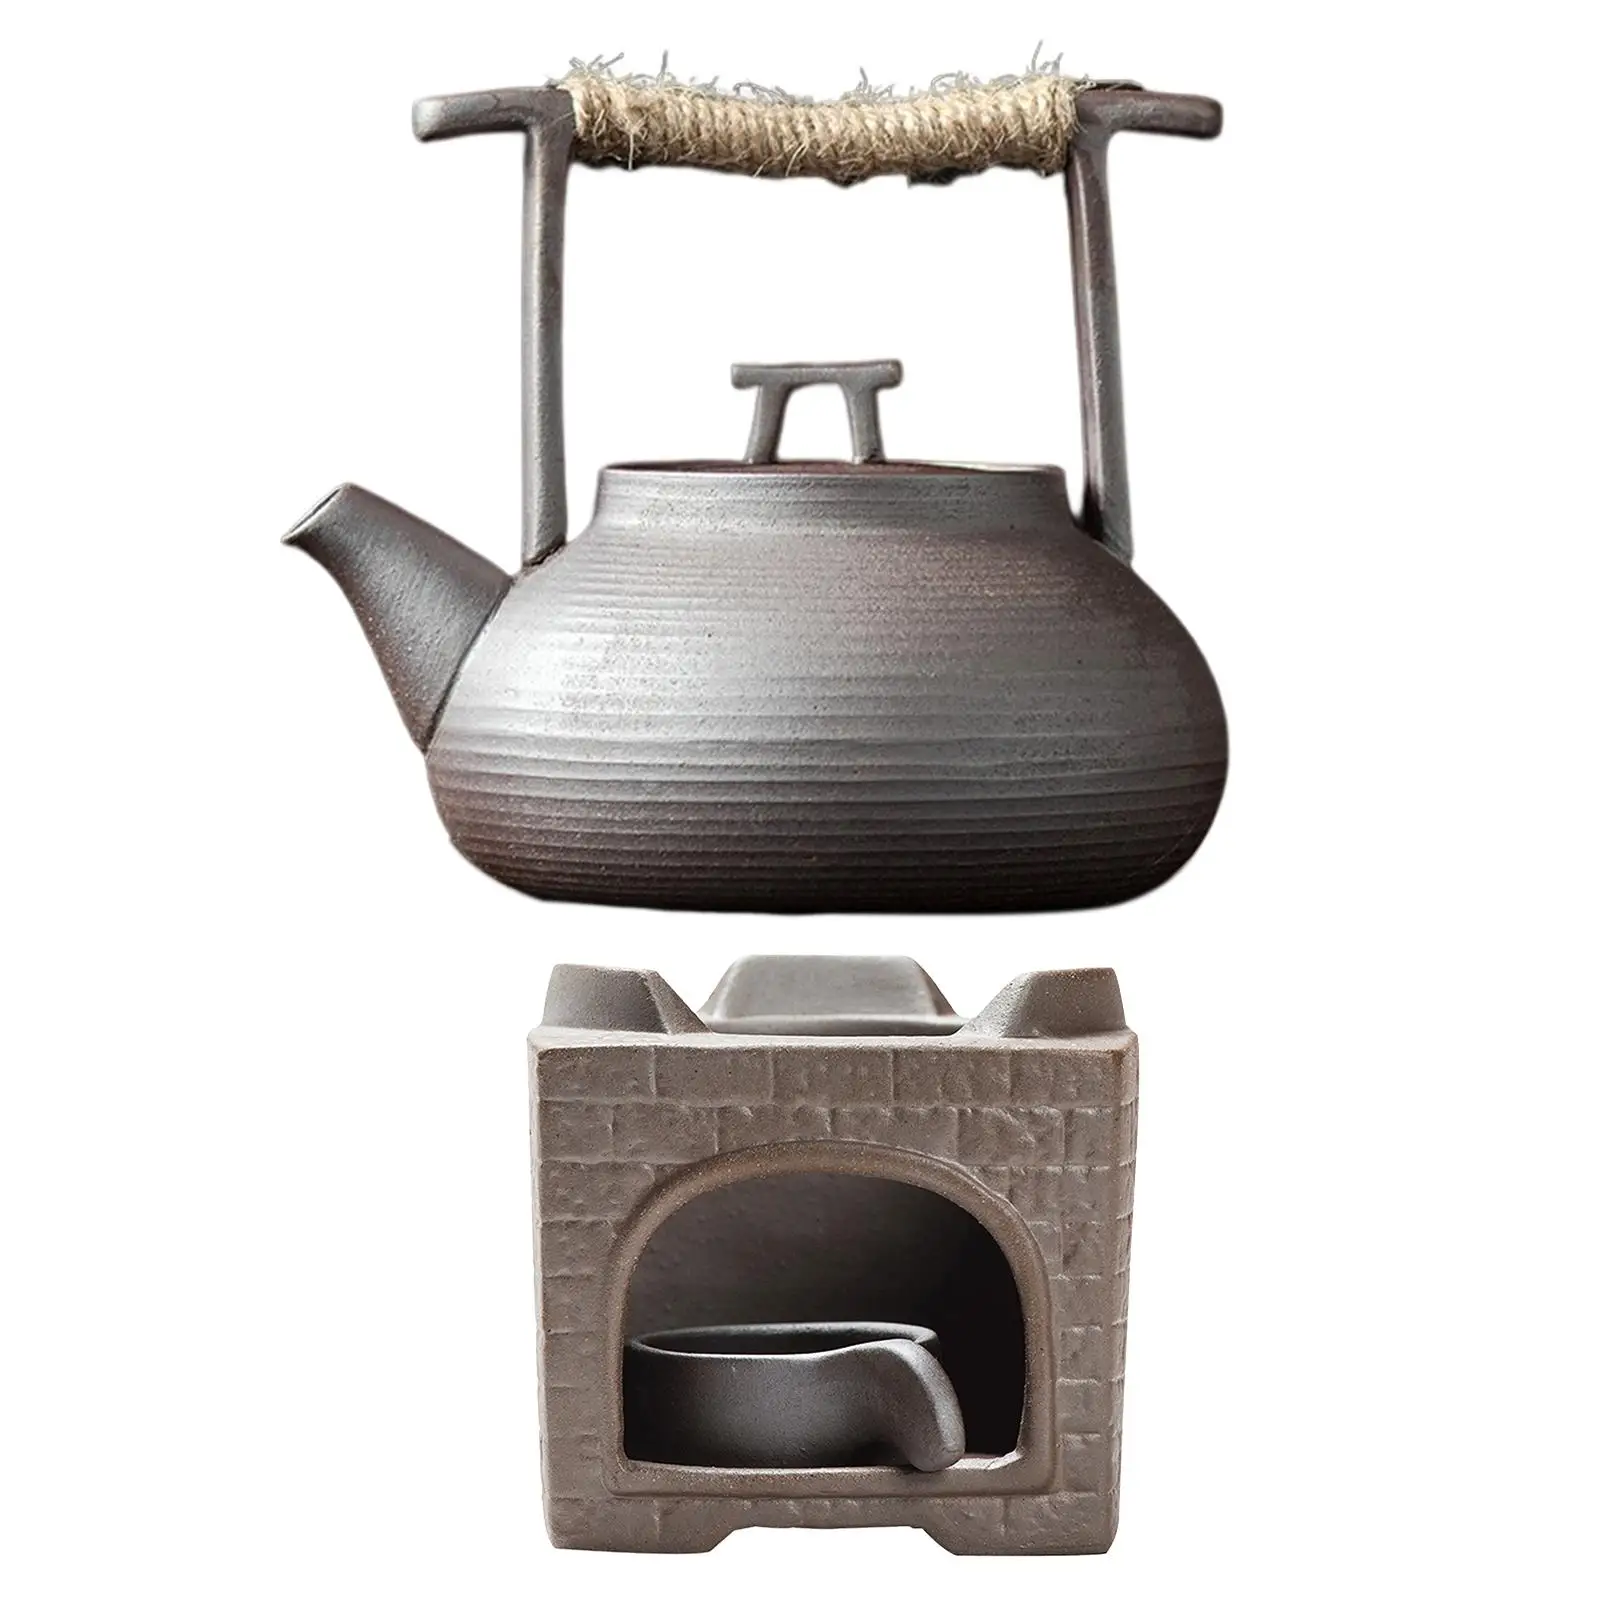 Japanese Teakettle Teapot Water Pot Handmade Teapot Warmer Portable Pot for Dining Room Camping Home Teahouse Picnic